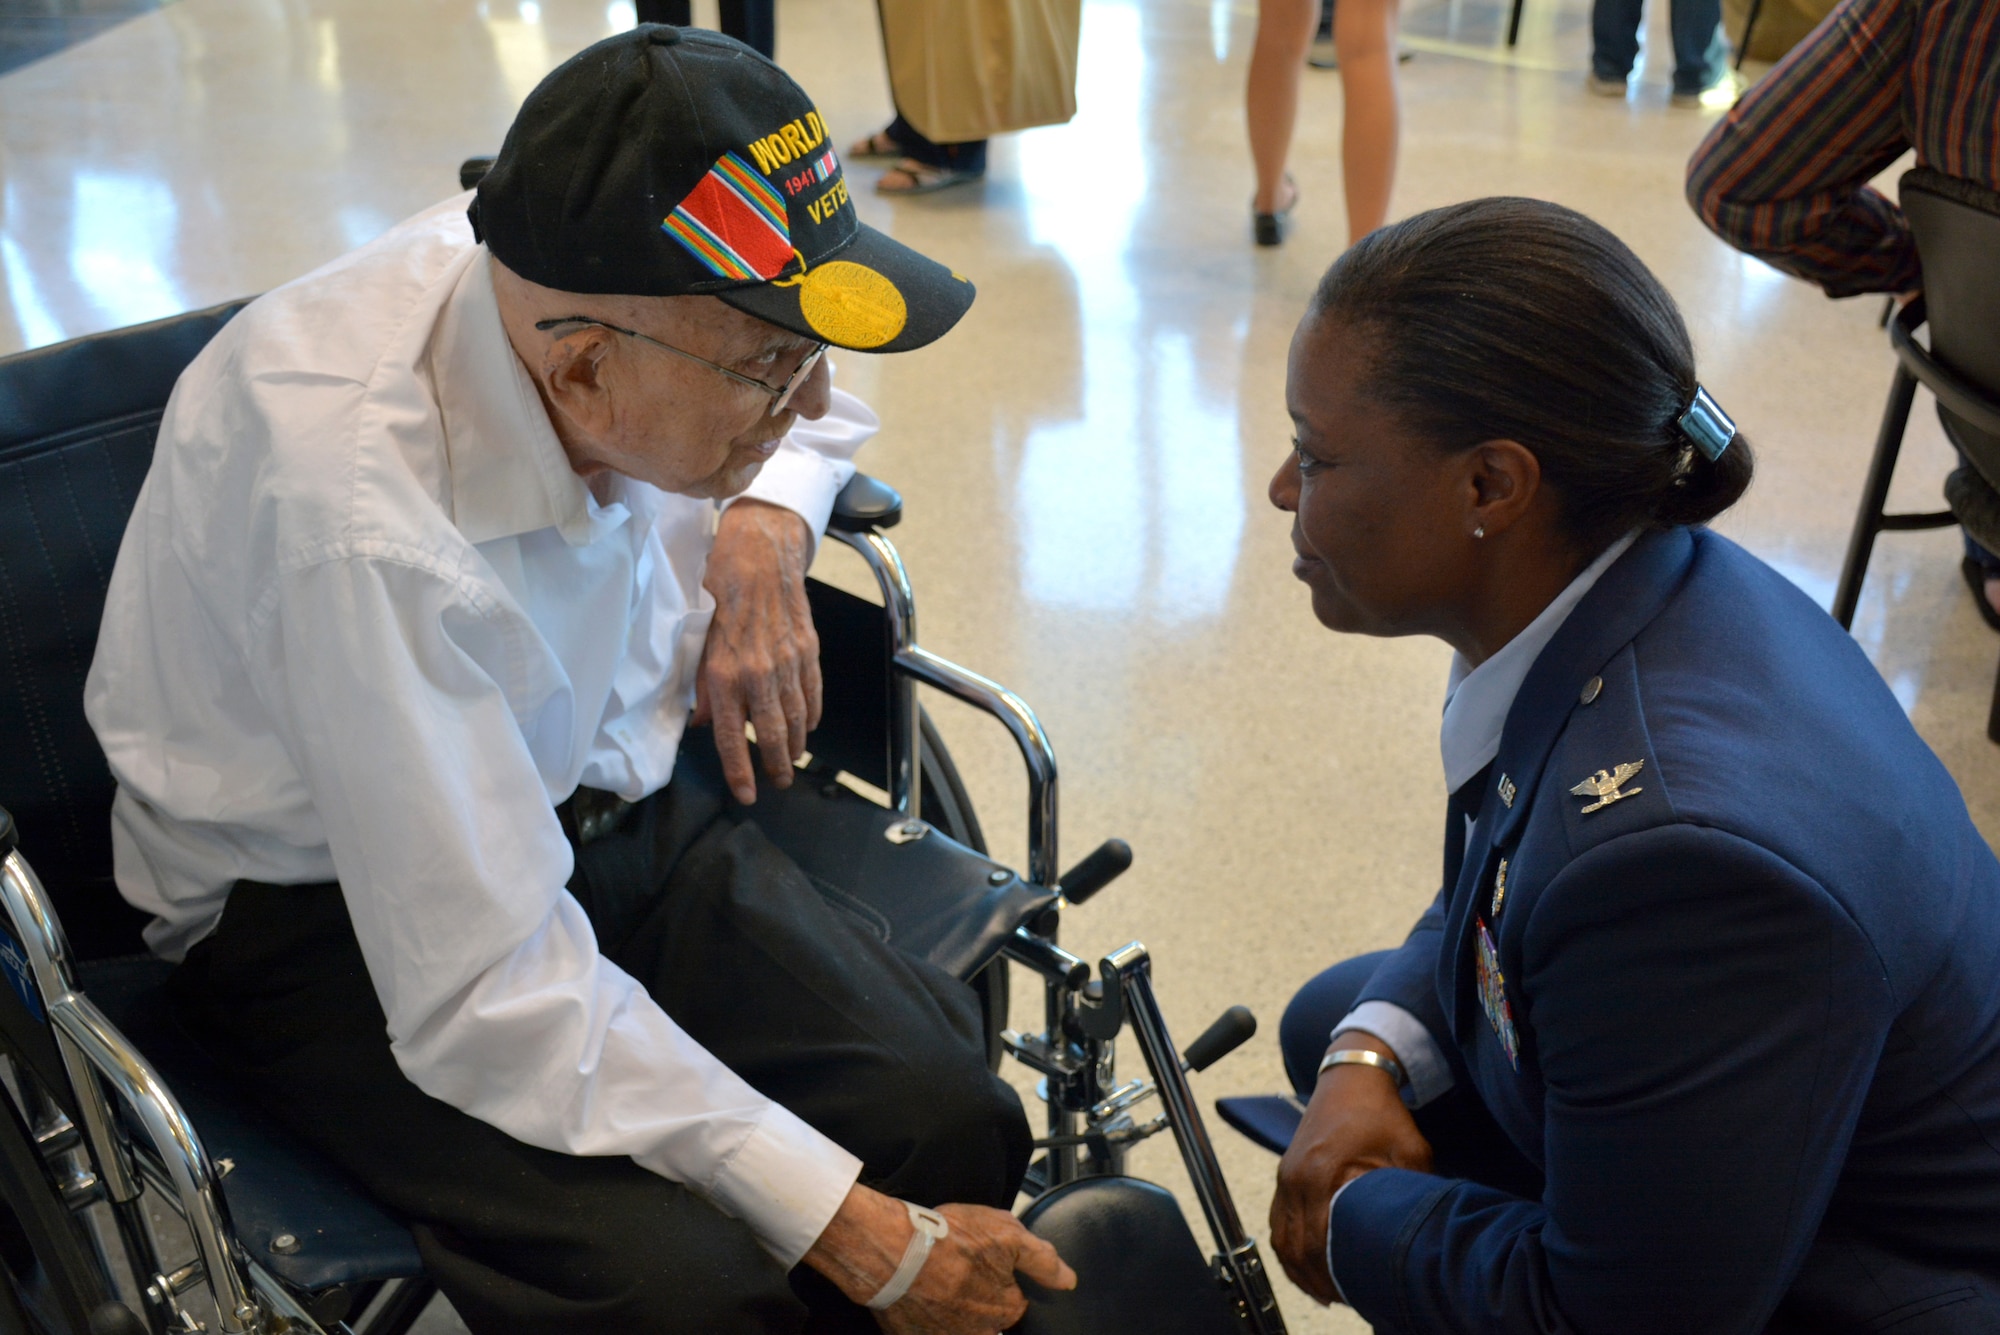 Col. Stephanie Wilson, 72nd Air Base Wing and installation commander, talks with Bob Hedgecoke, 93, of Guthrie, during a sendoff reception for Honor Flight veterans Sept. 15 at Rose State College. Mr. Hedgecoke was a radio repairman during World War II, assigned to the 551st Signal Battalion, 3rd Army. He was one of 81 veterans taking part in an Oklahoma Honor Flight last week that took the WWII and Korean War veterans from Oklahoma City to Washington, D.C., to visit memorials built in their honor. (Air Force photo by Darren D. Heusel/Released)